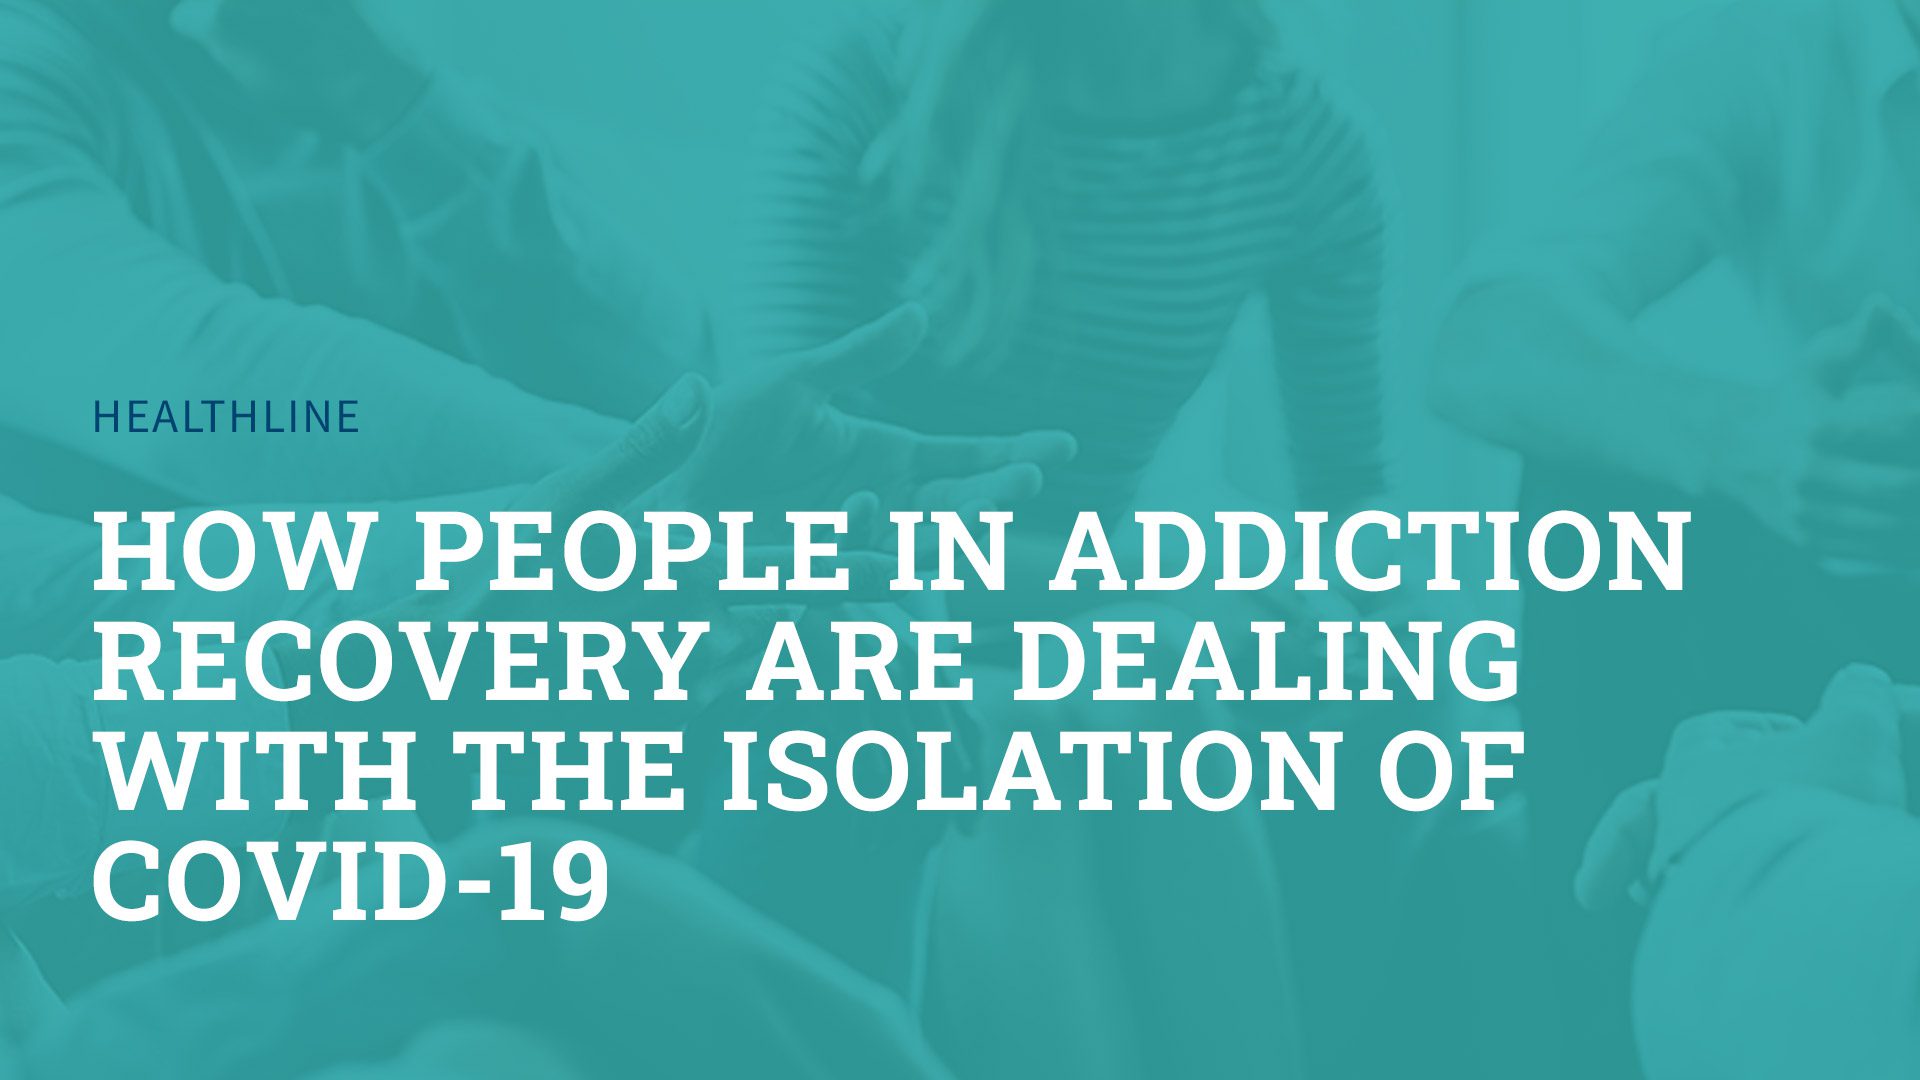 How People in Addiction Recovery Are Dealing with the Isolation of COVID-19